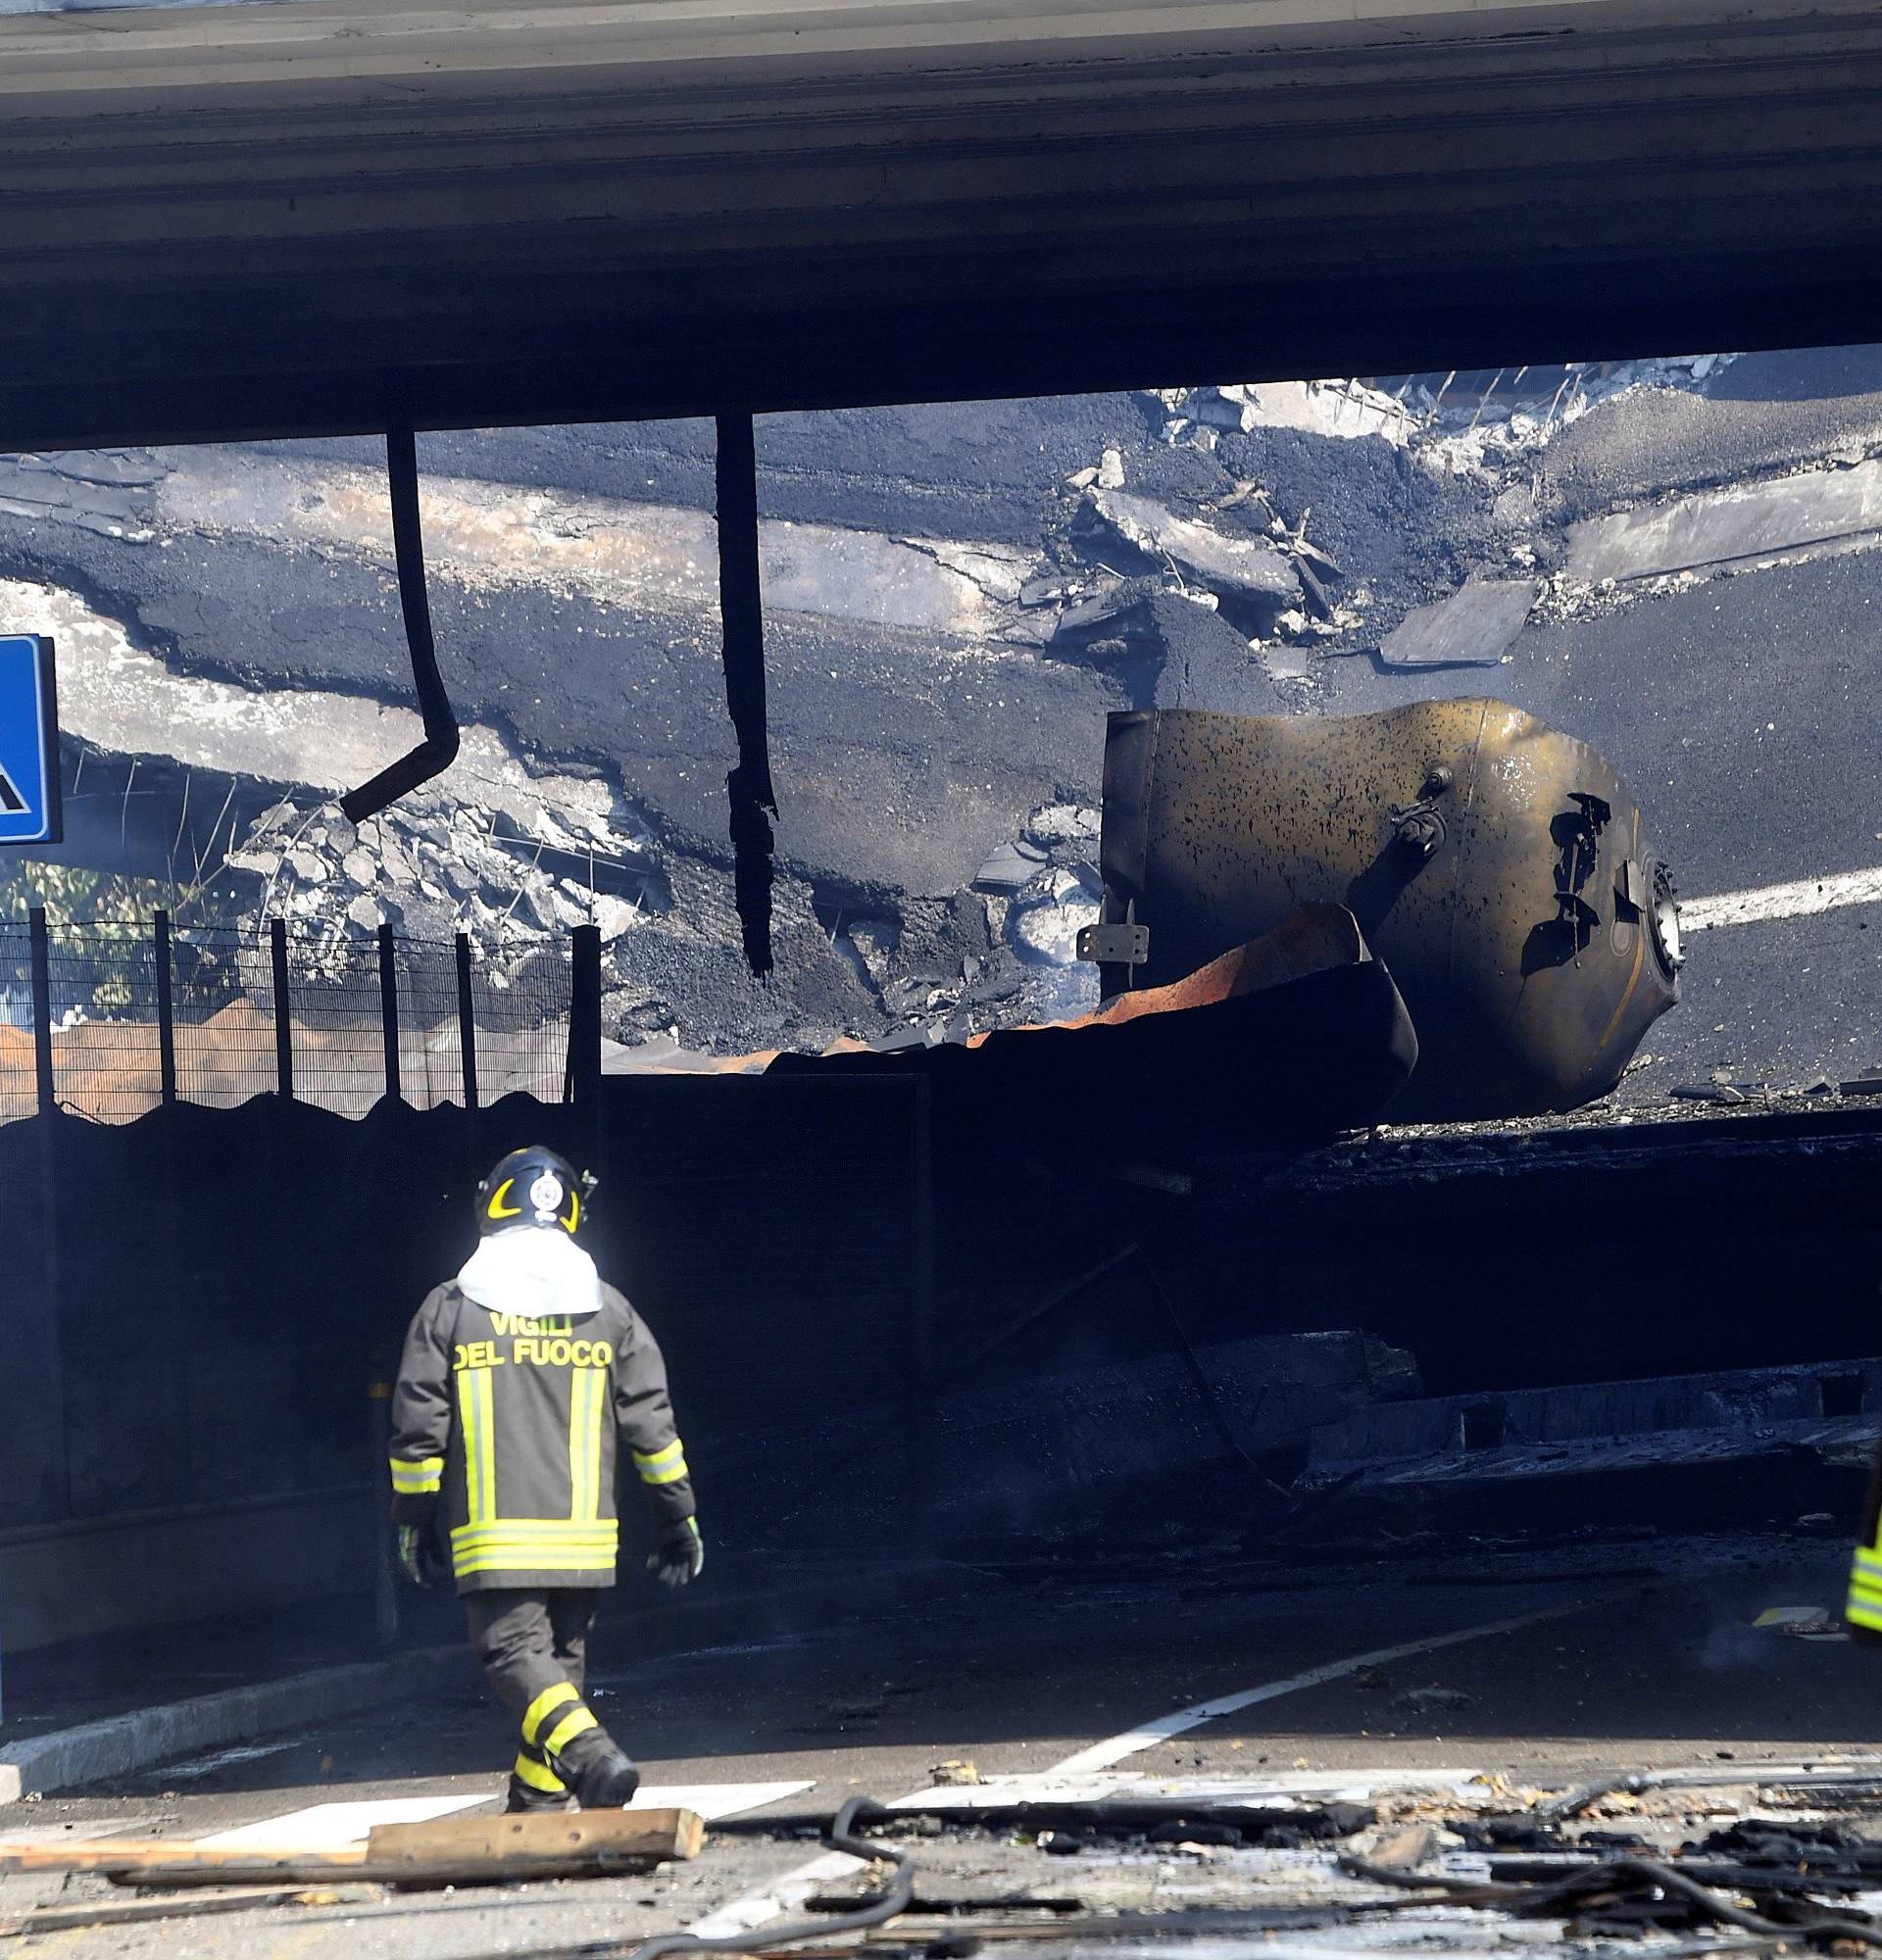 Firefighters work near the motorway after an accident caused a large explosion and fire at Borgo Panigale, on the outskirts of Bologna